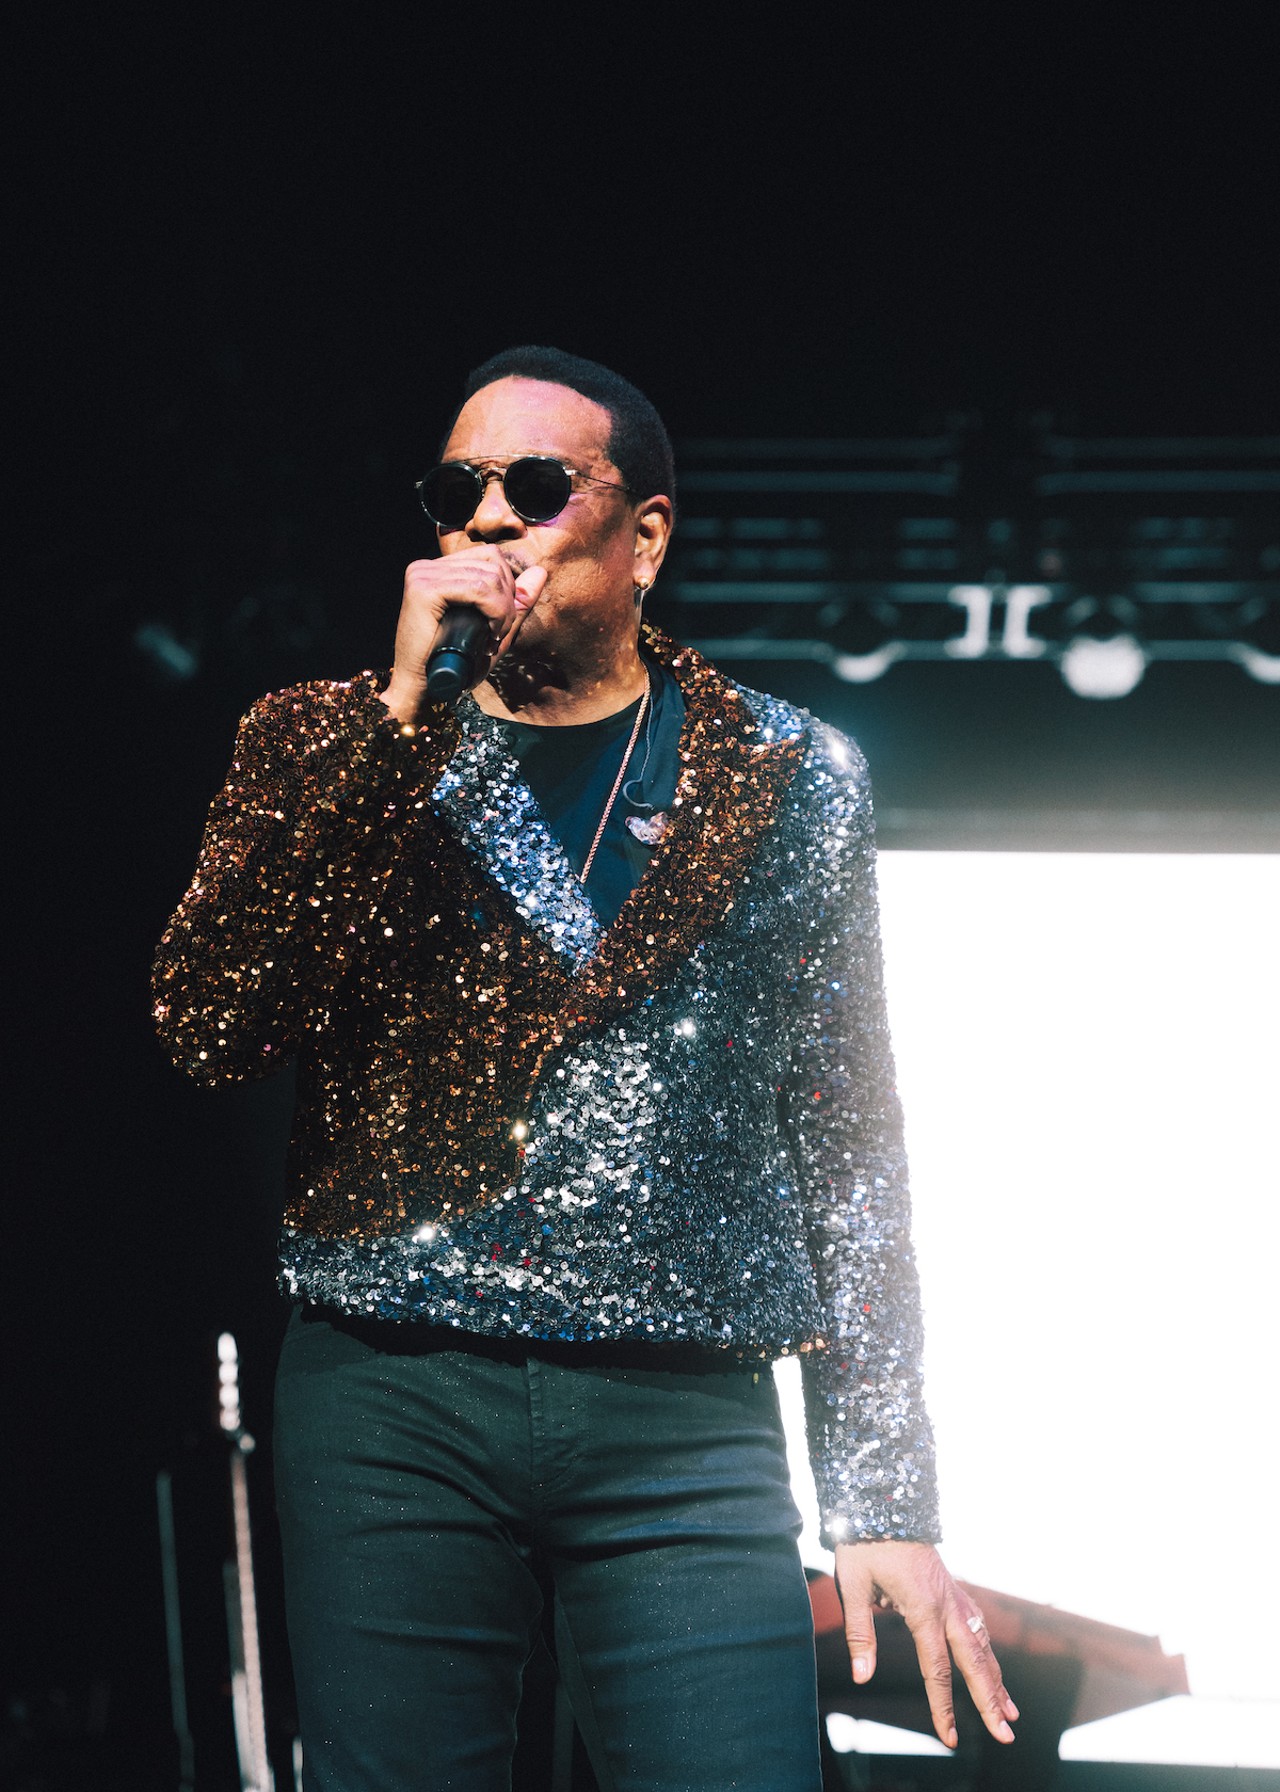 Photos: New Edition, Charlie Wilson and Jodeci bring 'The Culture' tour to Tampa